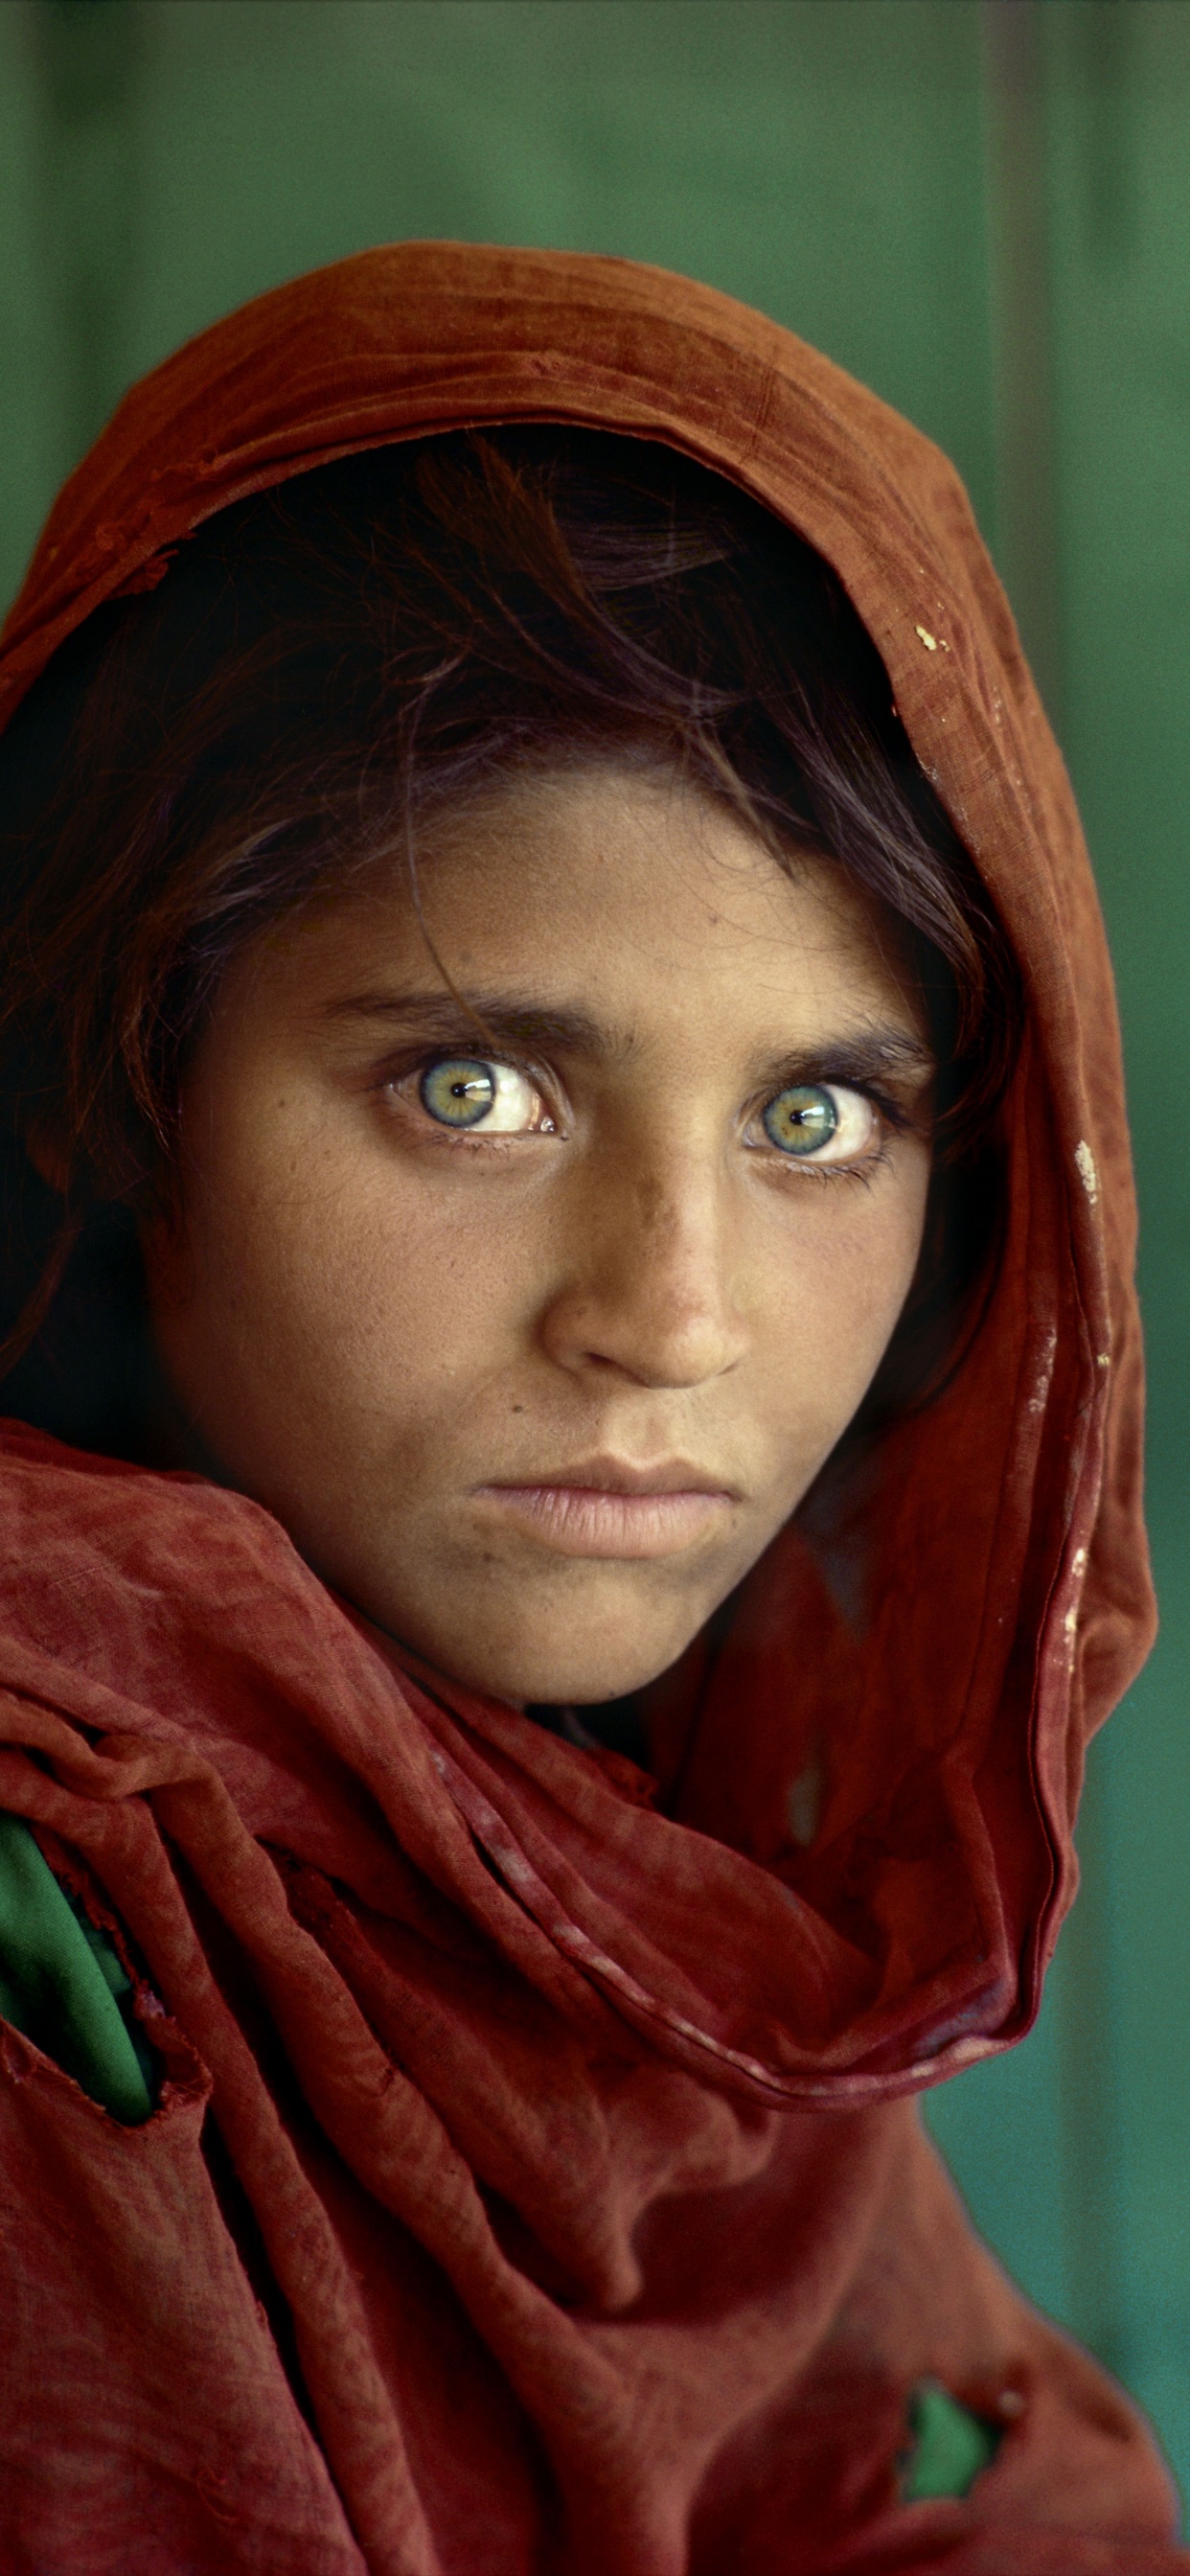 Afghan Girl, Afghanistan, National Geographic, Face, Eye. Wallpaper in 1242x2688 Resolution